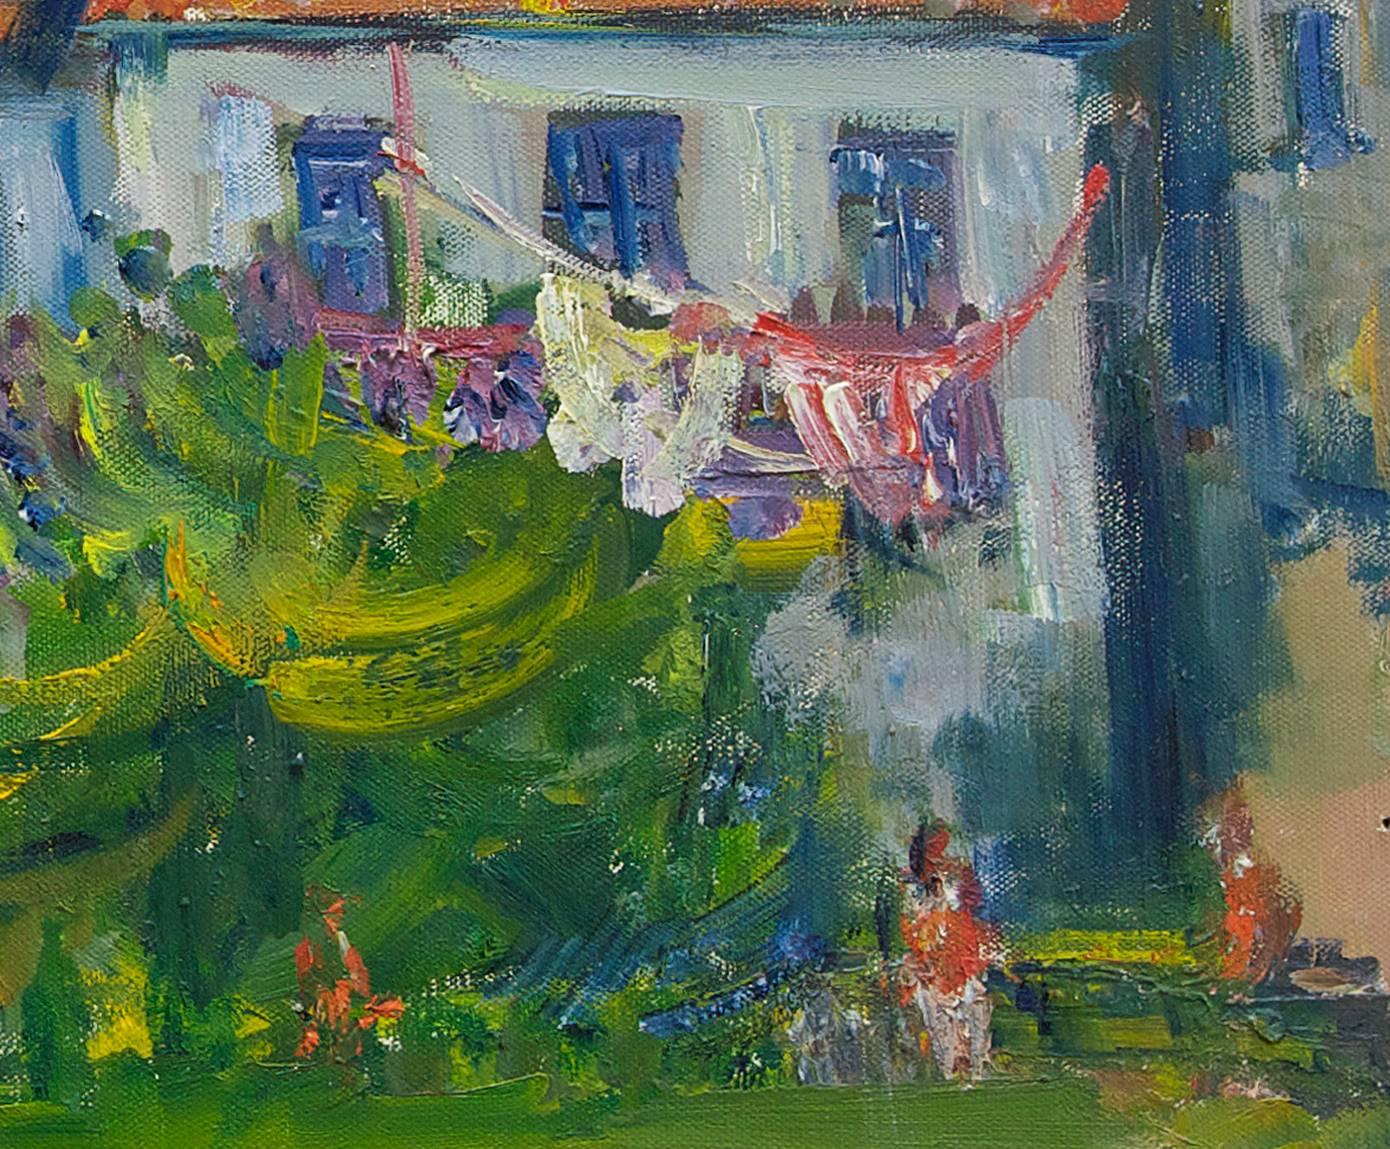 Farmhouse in Provence, Post Impressionist Oil on Canvas - Painting by Jacques Zucker